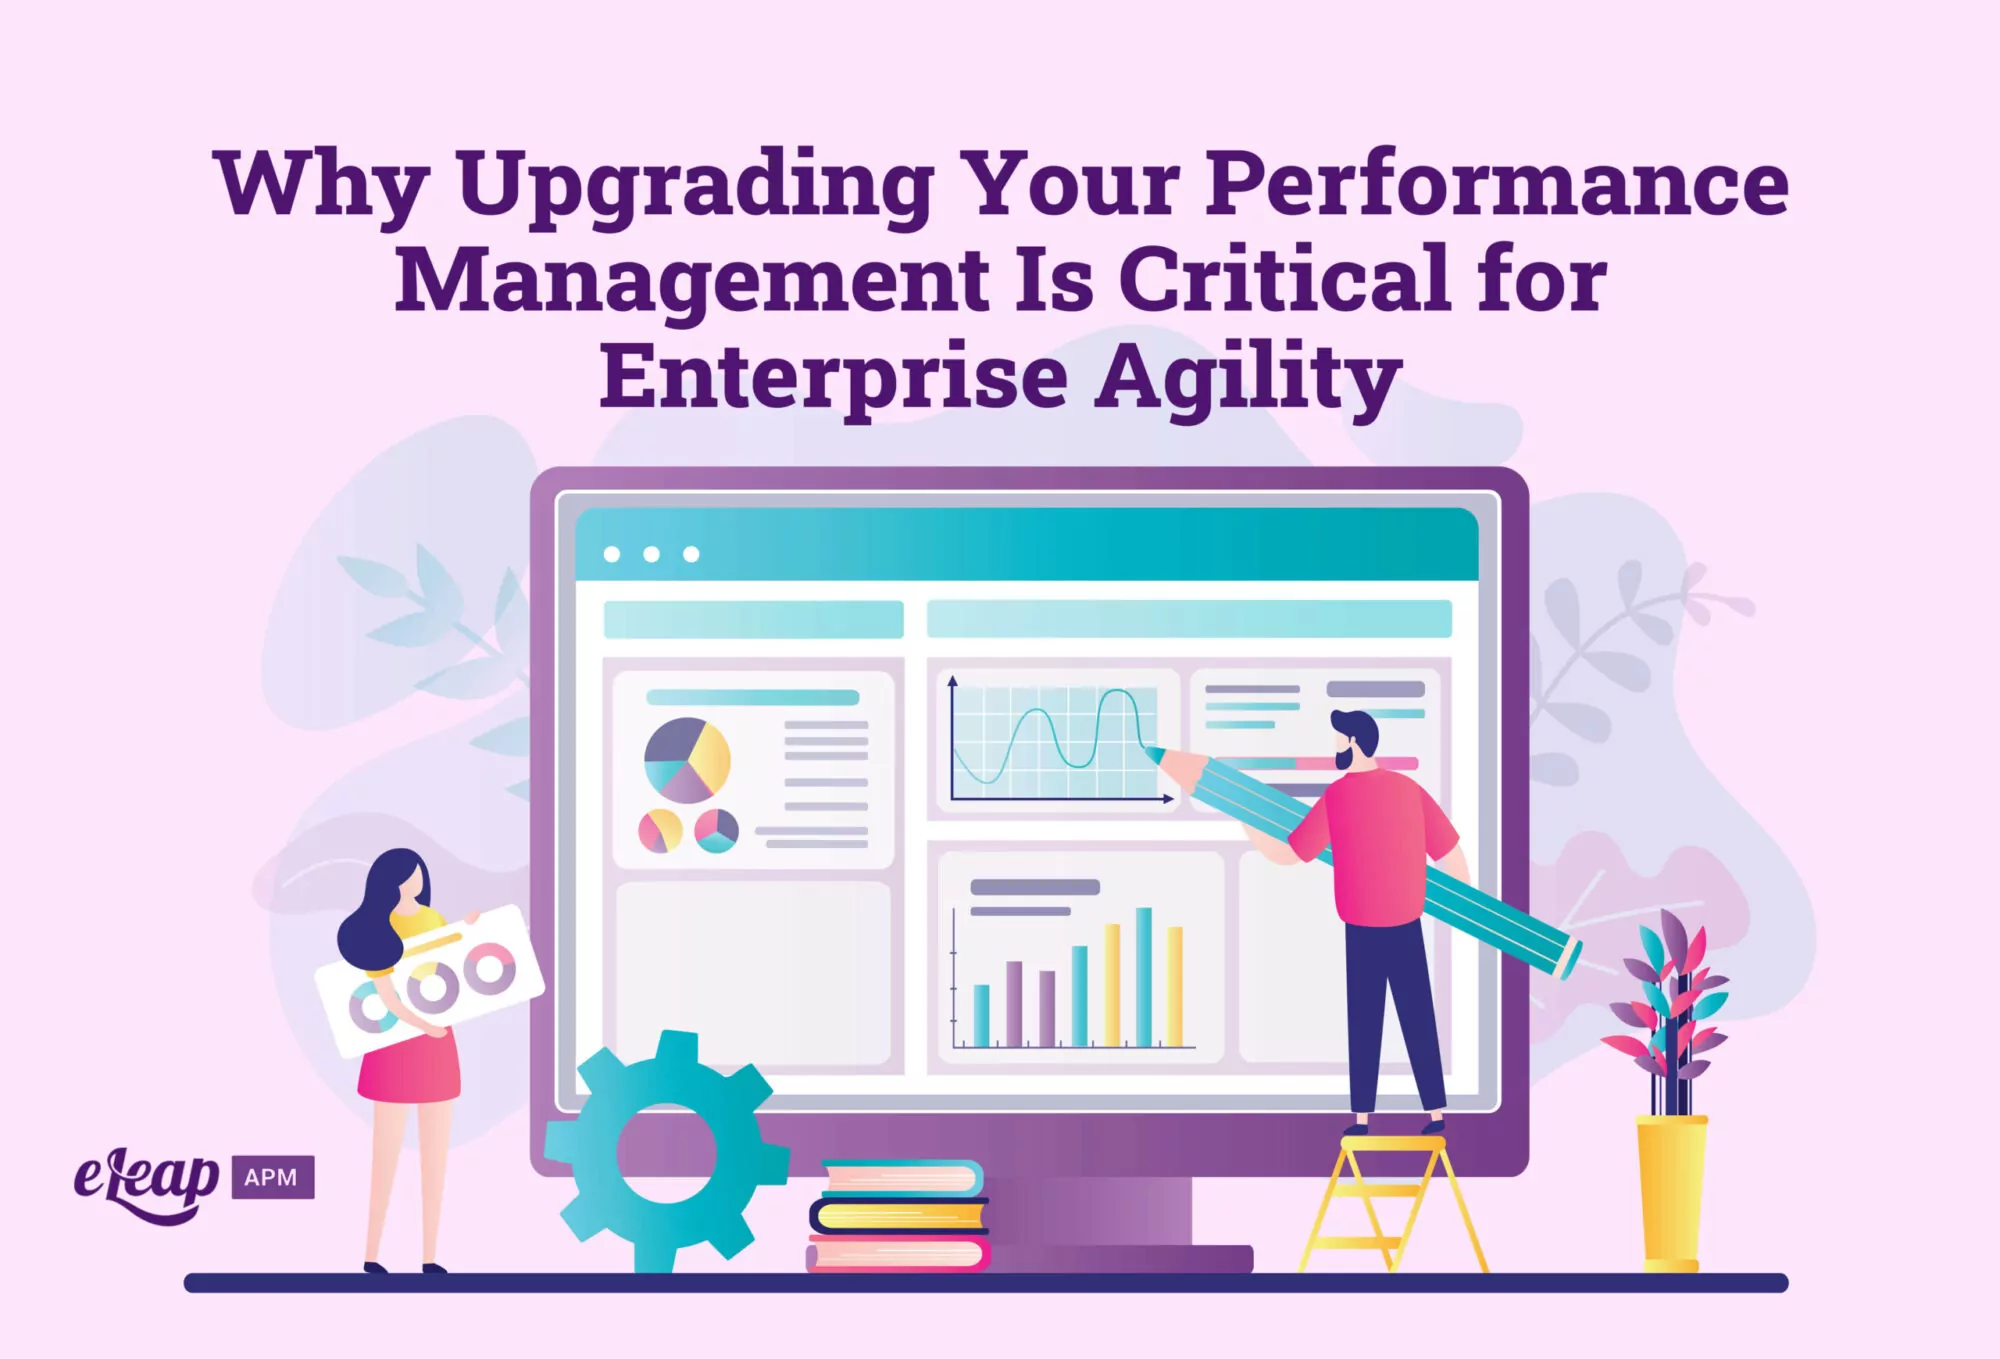 Why Upgrading Your Performance Management Is Critical for Enterprise Agility